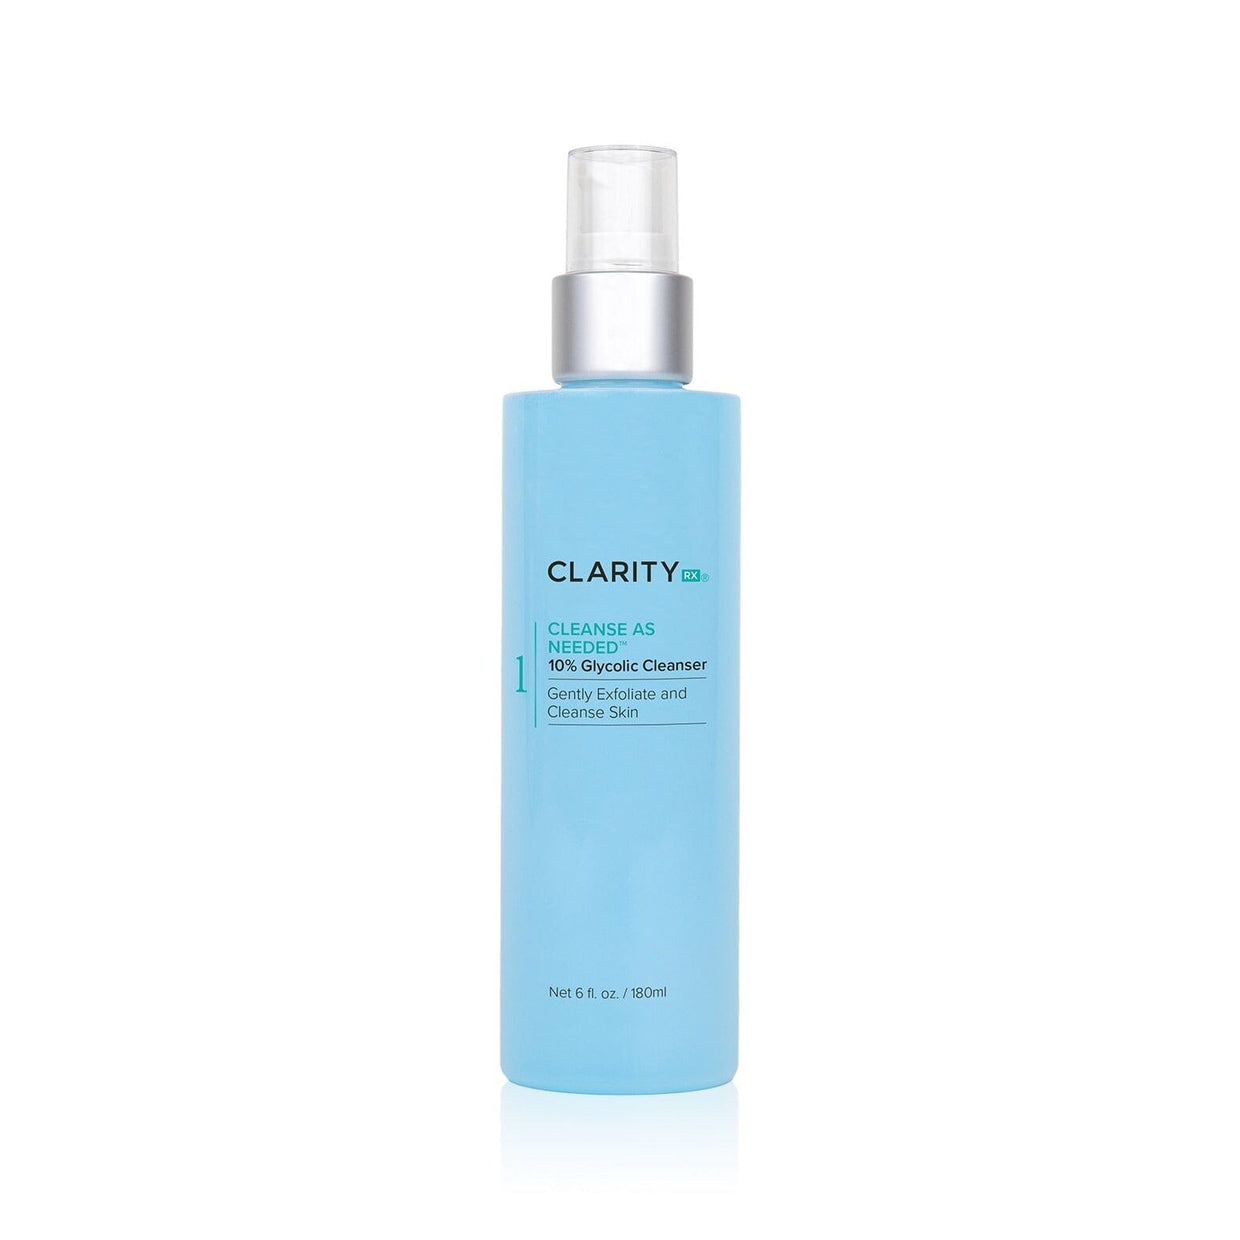 ClarityRx Cleanse As Needed 10% Glycolic Cleanser ClarityRx 6.0 fl. oz. Shop at Exclusive Beauty Club